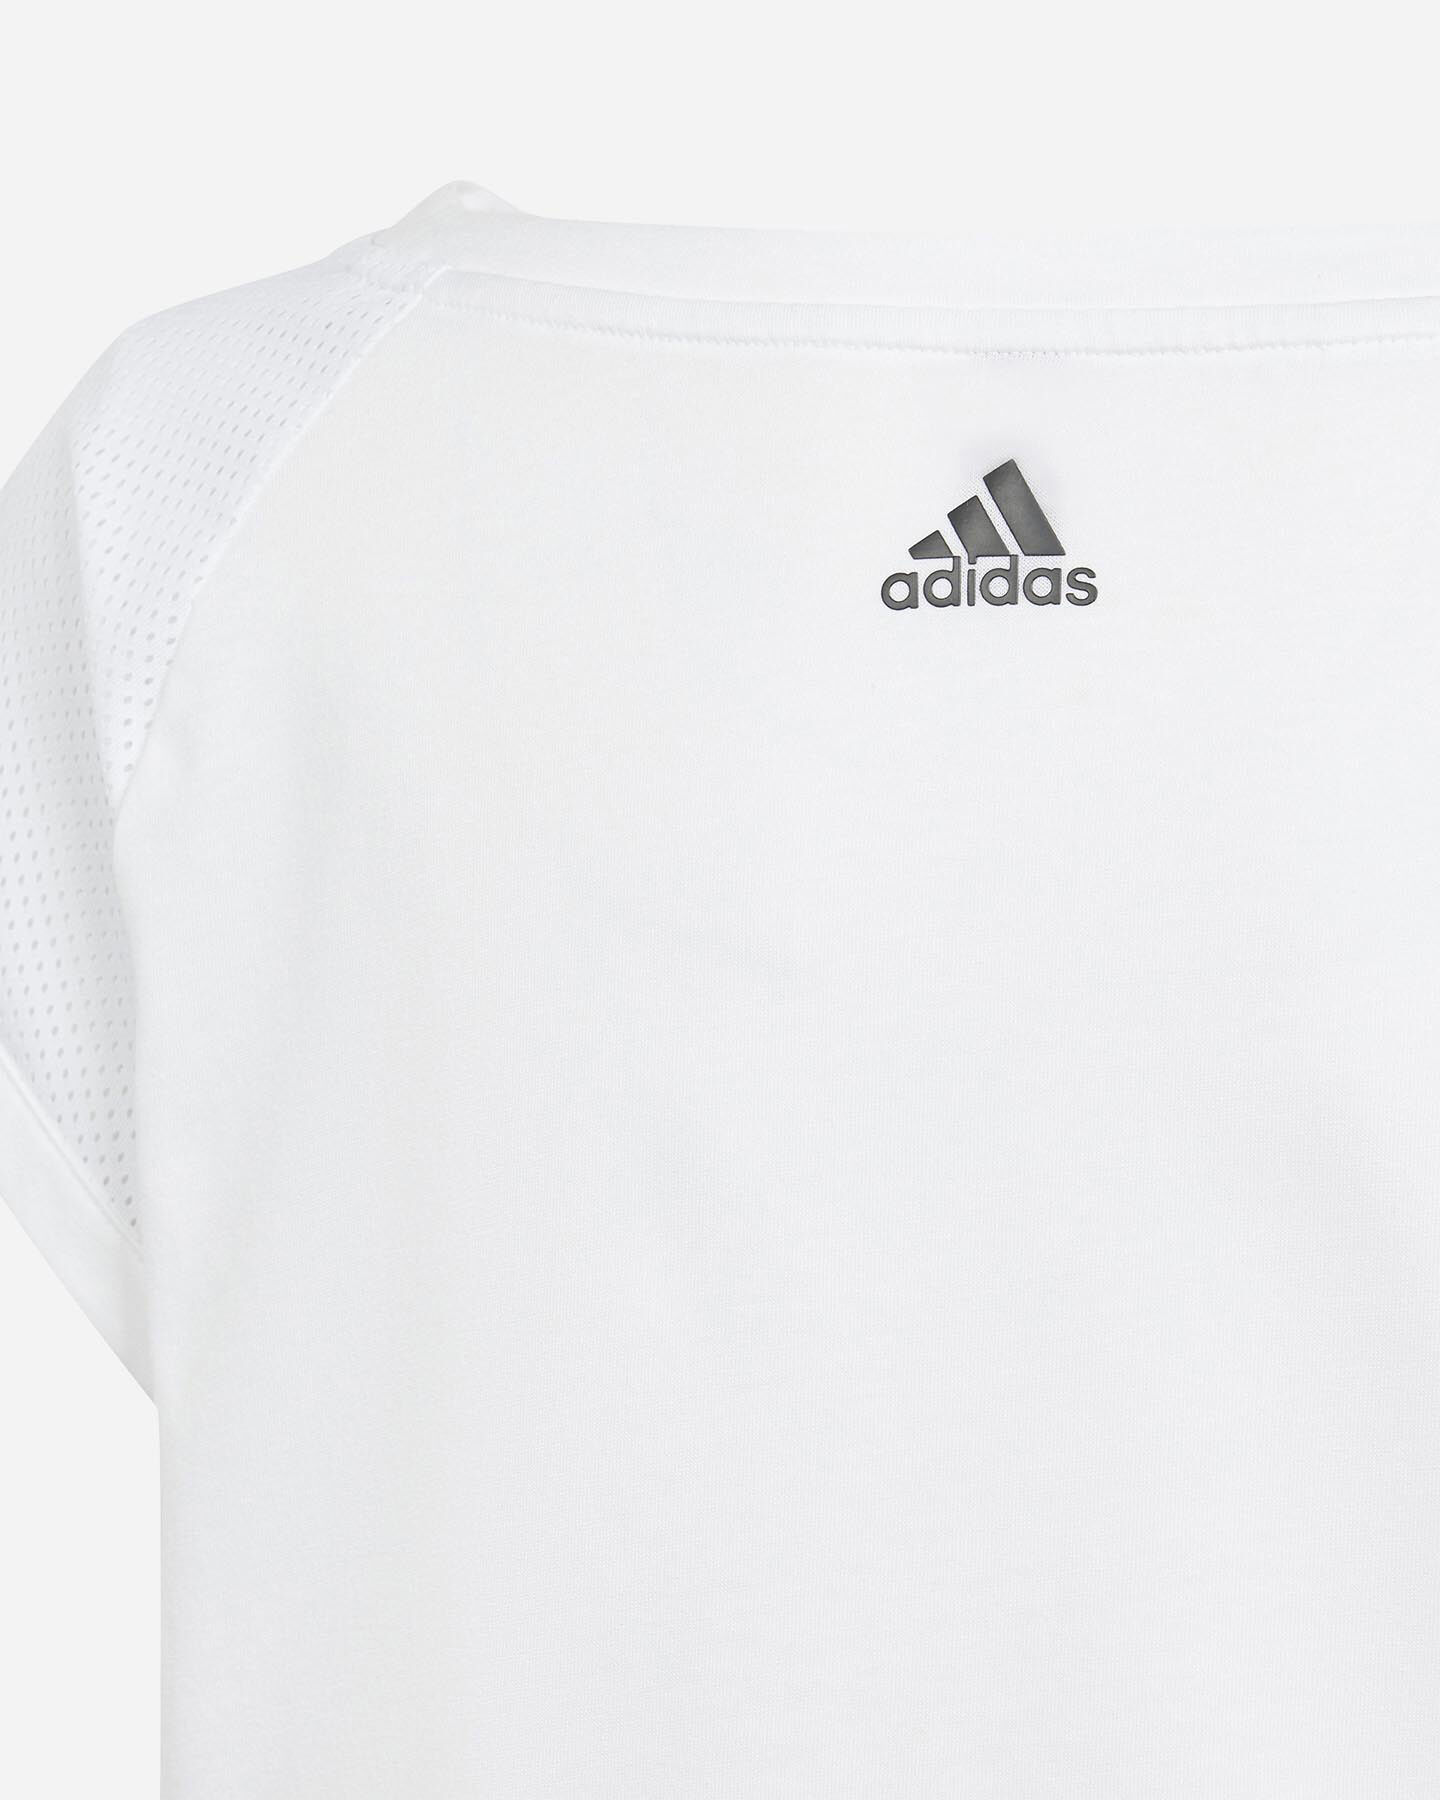  T-Shirt ADIDAS GIRL JR S5654340|UNI|7-8A scatto 4